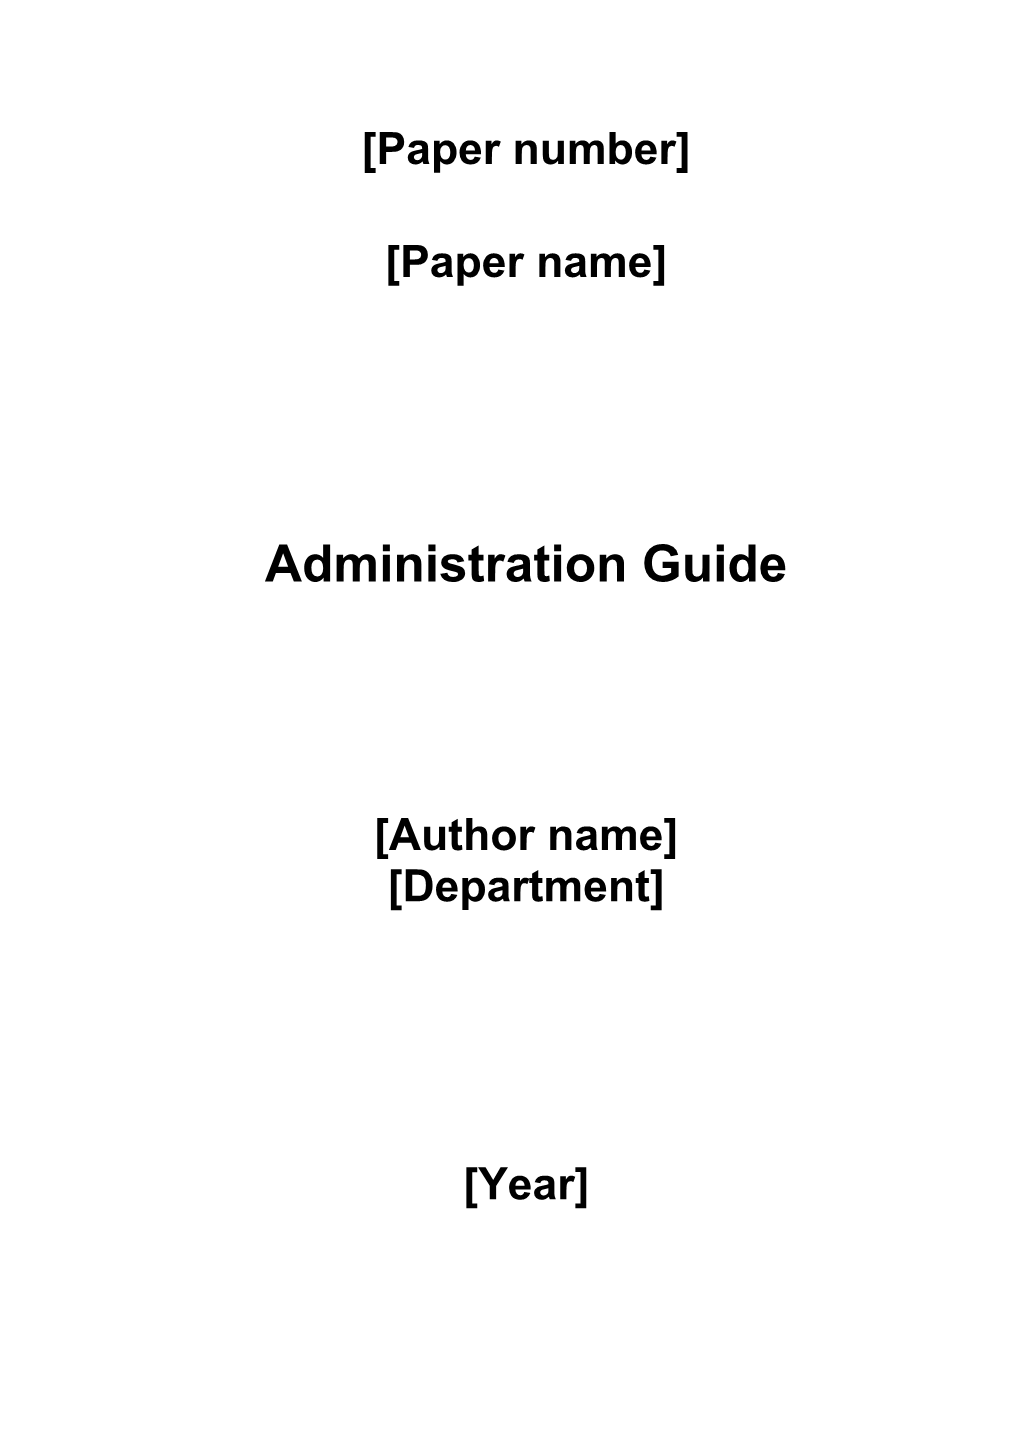 Using This Administration Guide Template s1